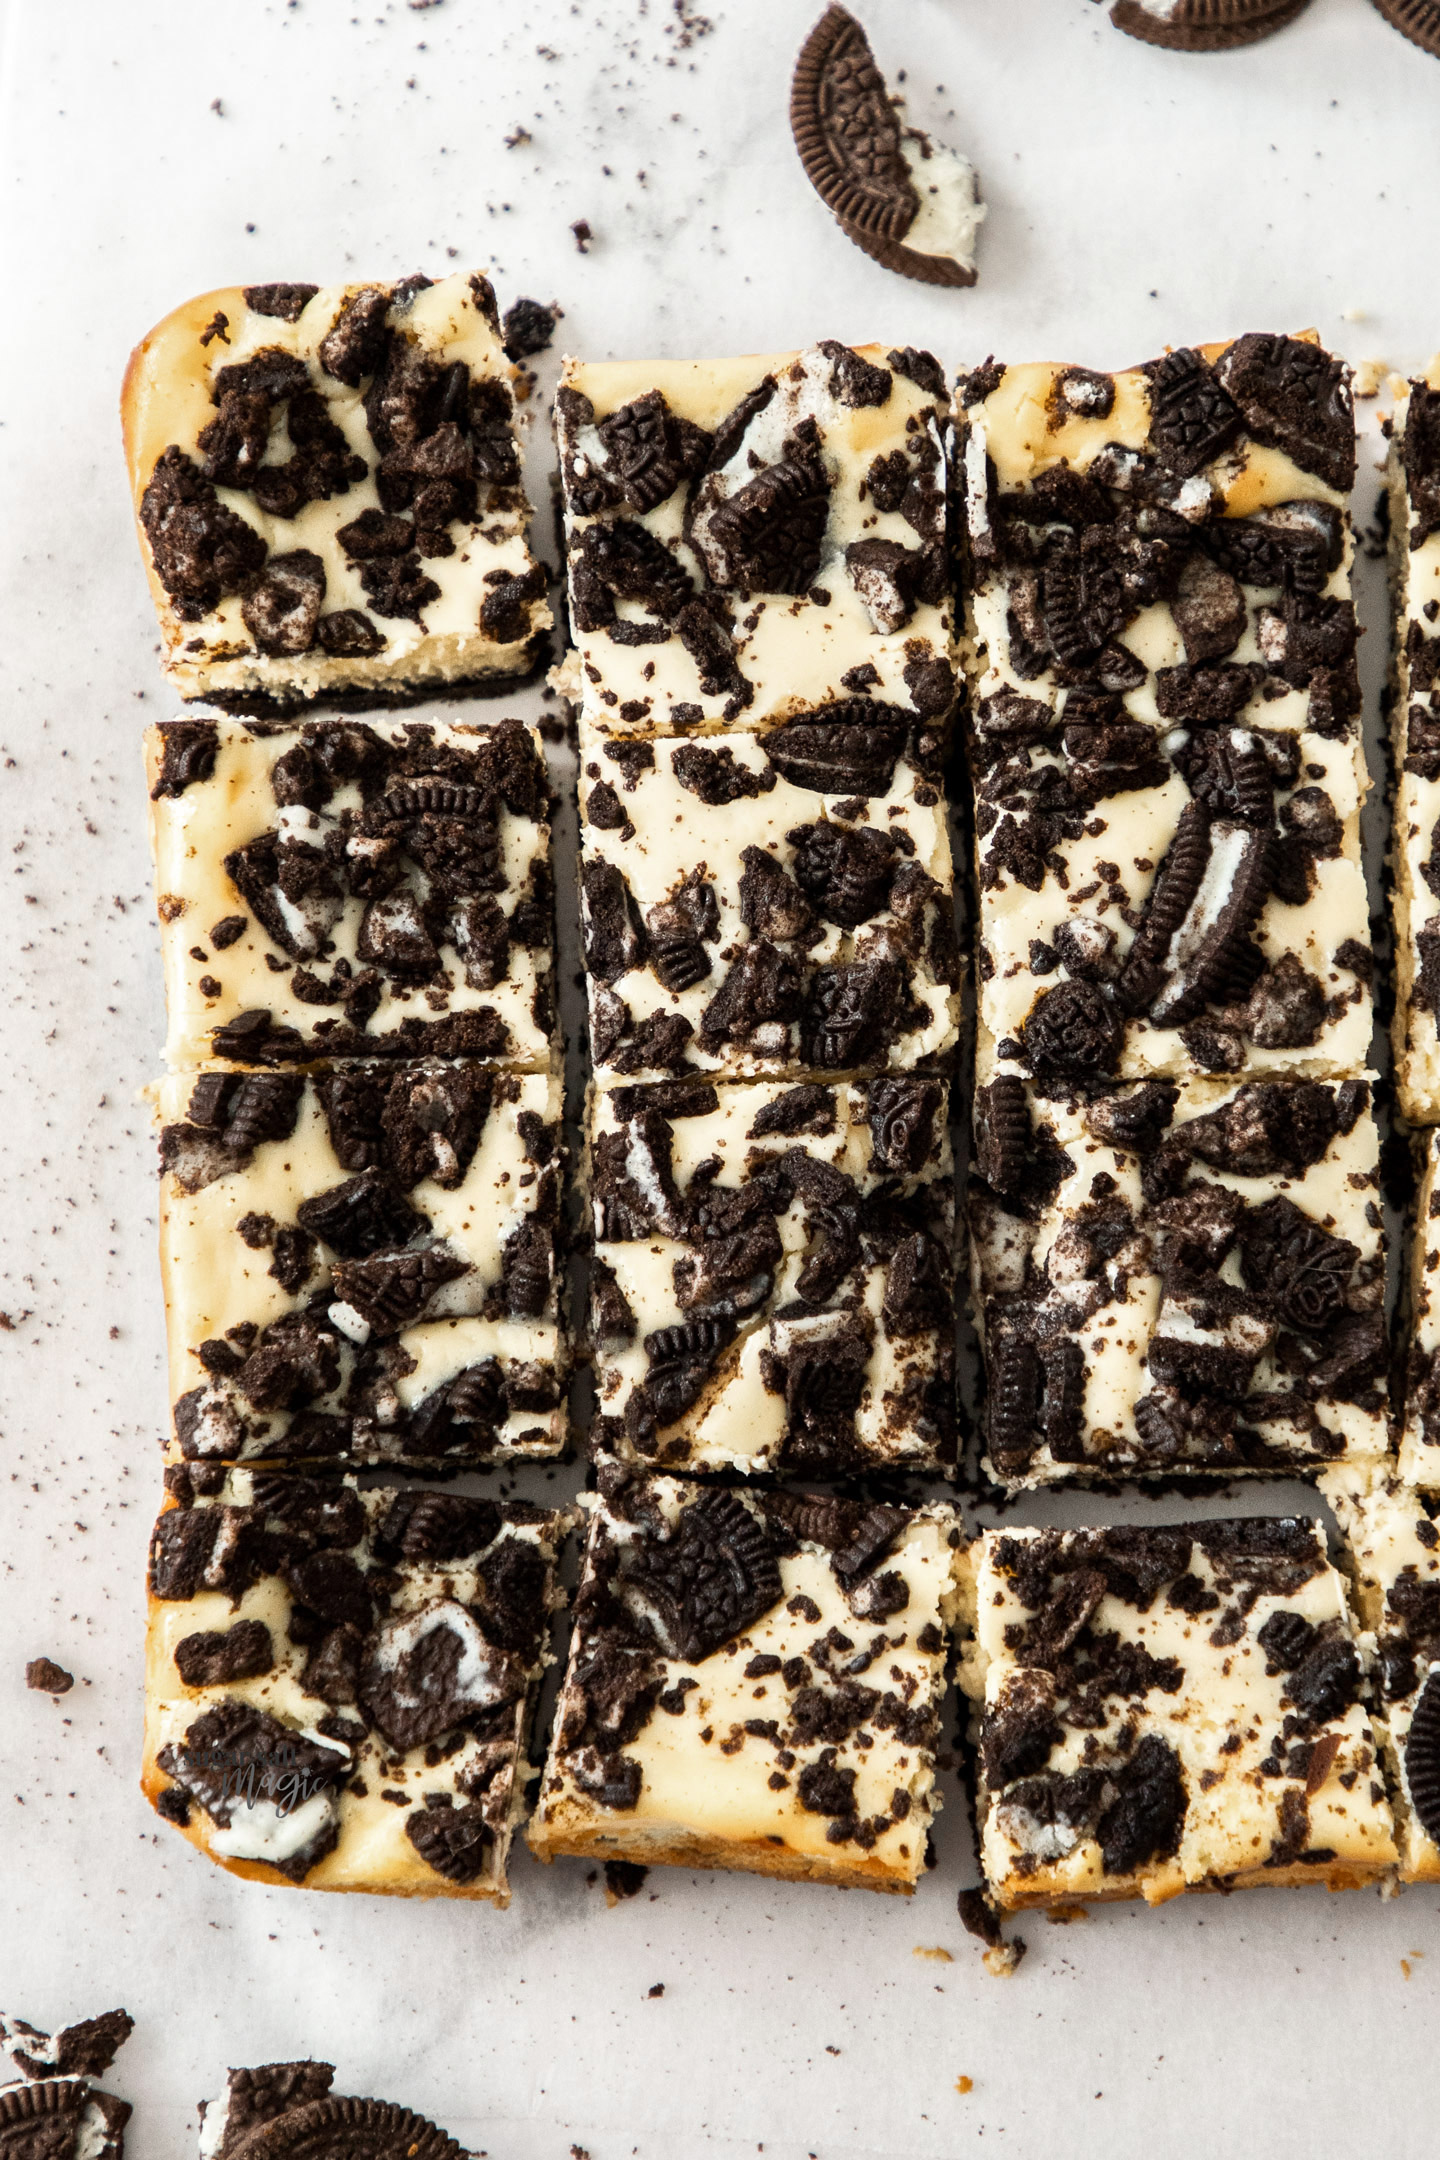 Top down view of 12 squares of Oreo cheesecake bars.